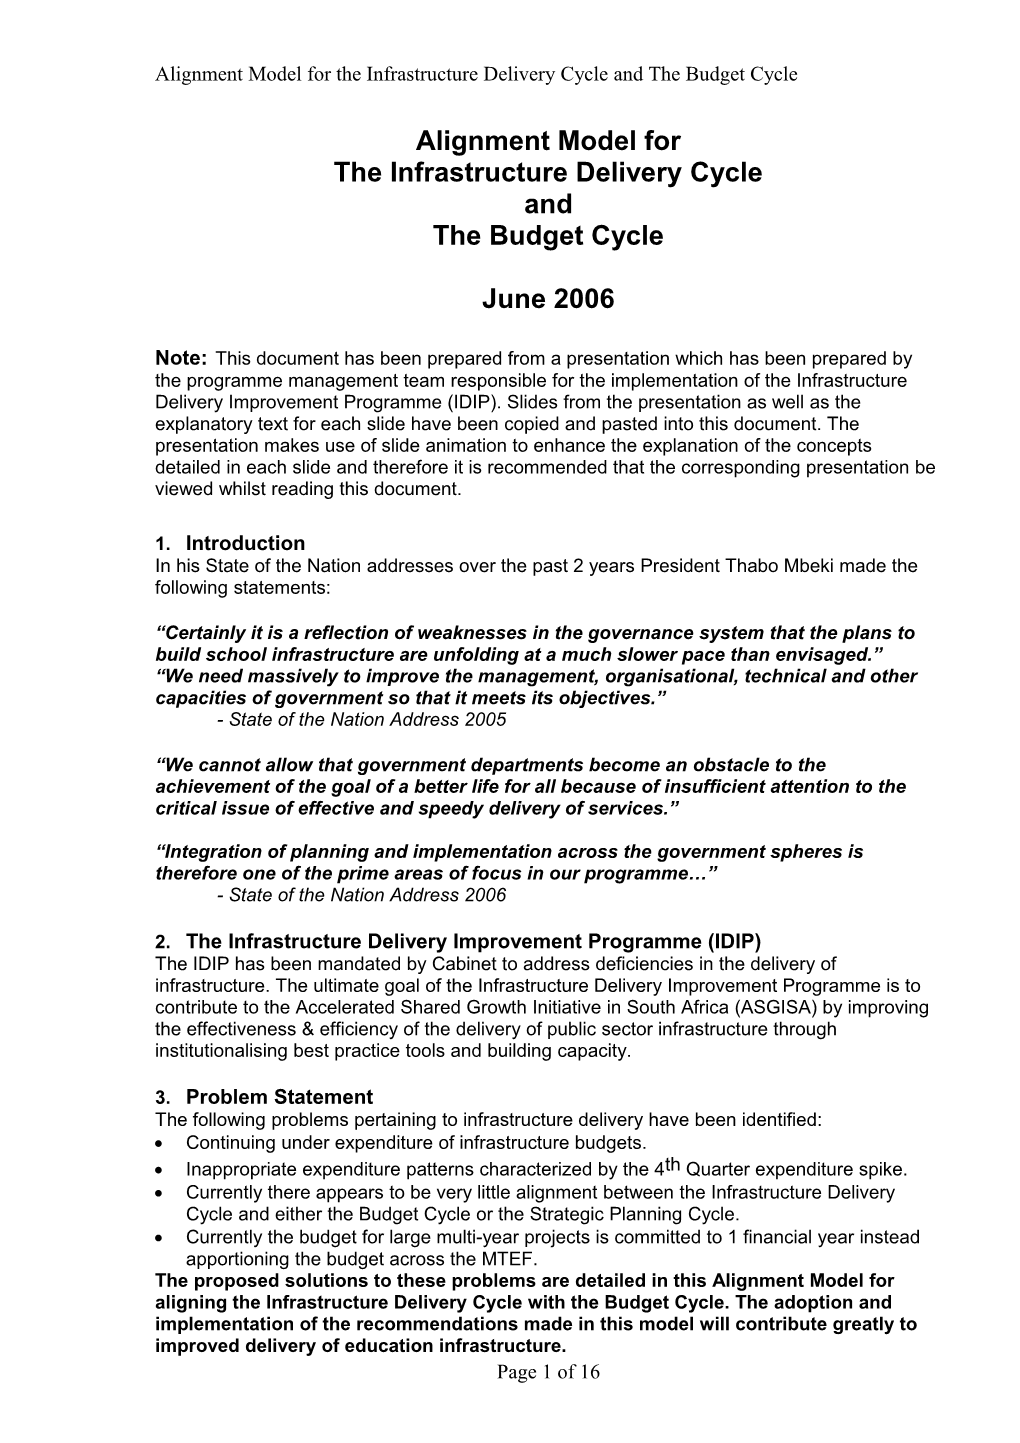 Alignment Model for the Infrastructure Delivery Cycle and the Budget Cycle